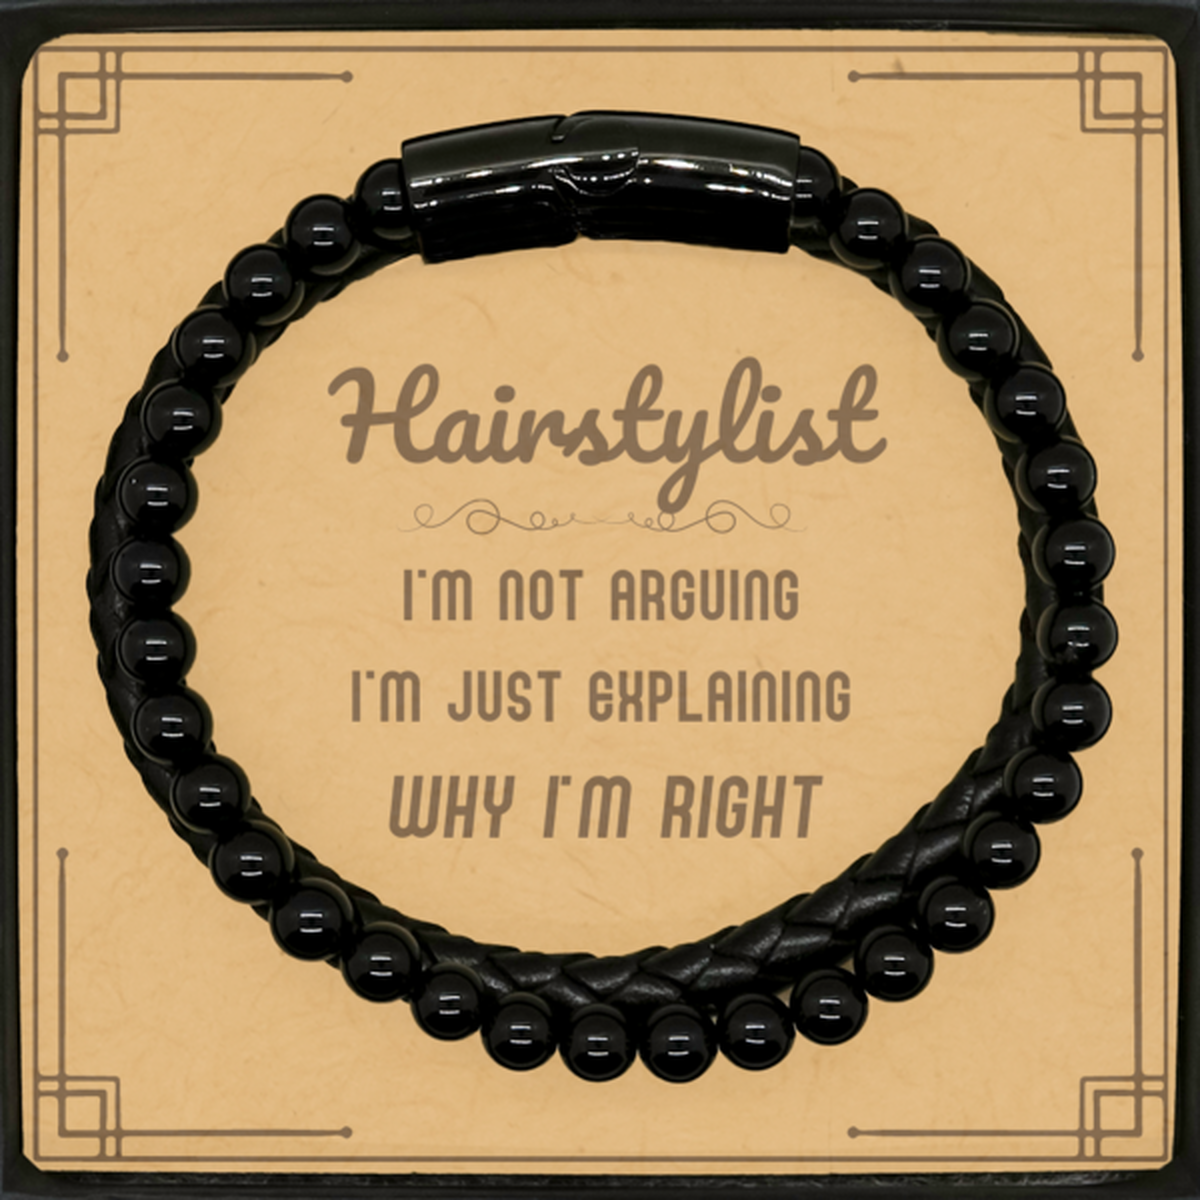 Hairstylist I'm not Arguing. I'm Just Explaining Why I'm RIGHT Stone Leather Bracelets, Funny Saying Quote Hairstylist Gifts For Hairstylist Message Card Graduation Birthday Christmas Gifts for Men Women Coworker